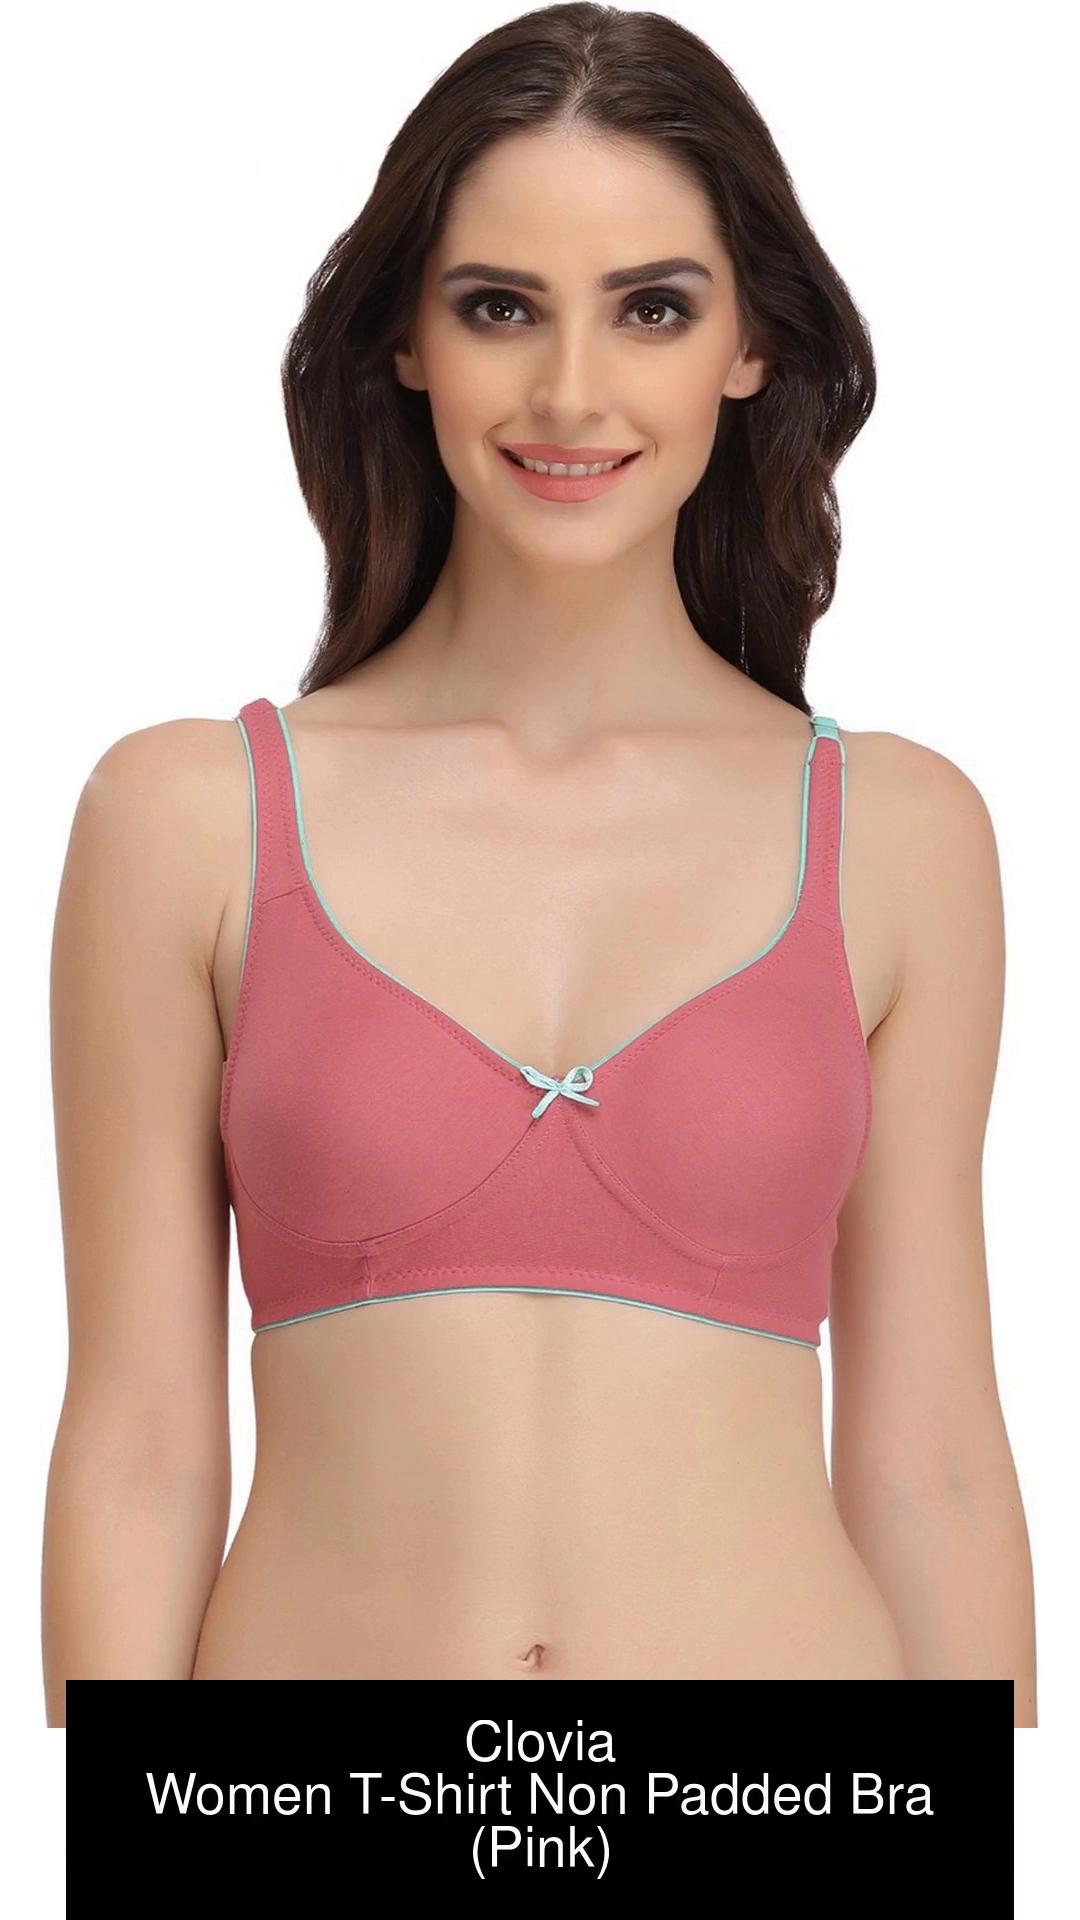 Clovia Non-Wired T-Shirt Bra With Layered Cups Women Everyday Non Padded Bra  - Buy Clovia Non-Wired T-Shirt Bra With Layered Cups Women Everyday Non Padded  Bra Online at Best Prices in India